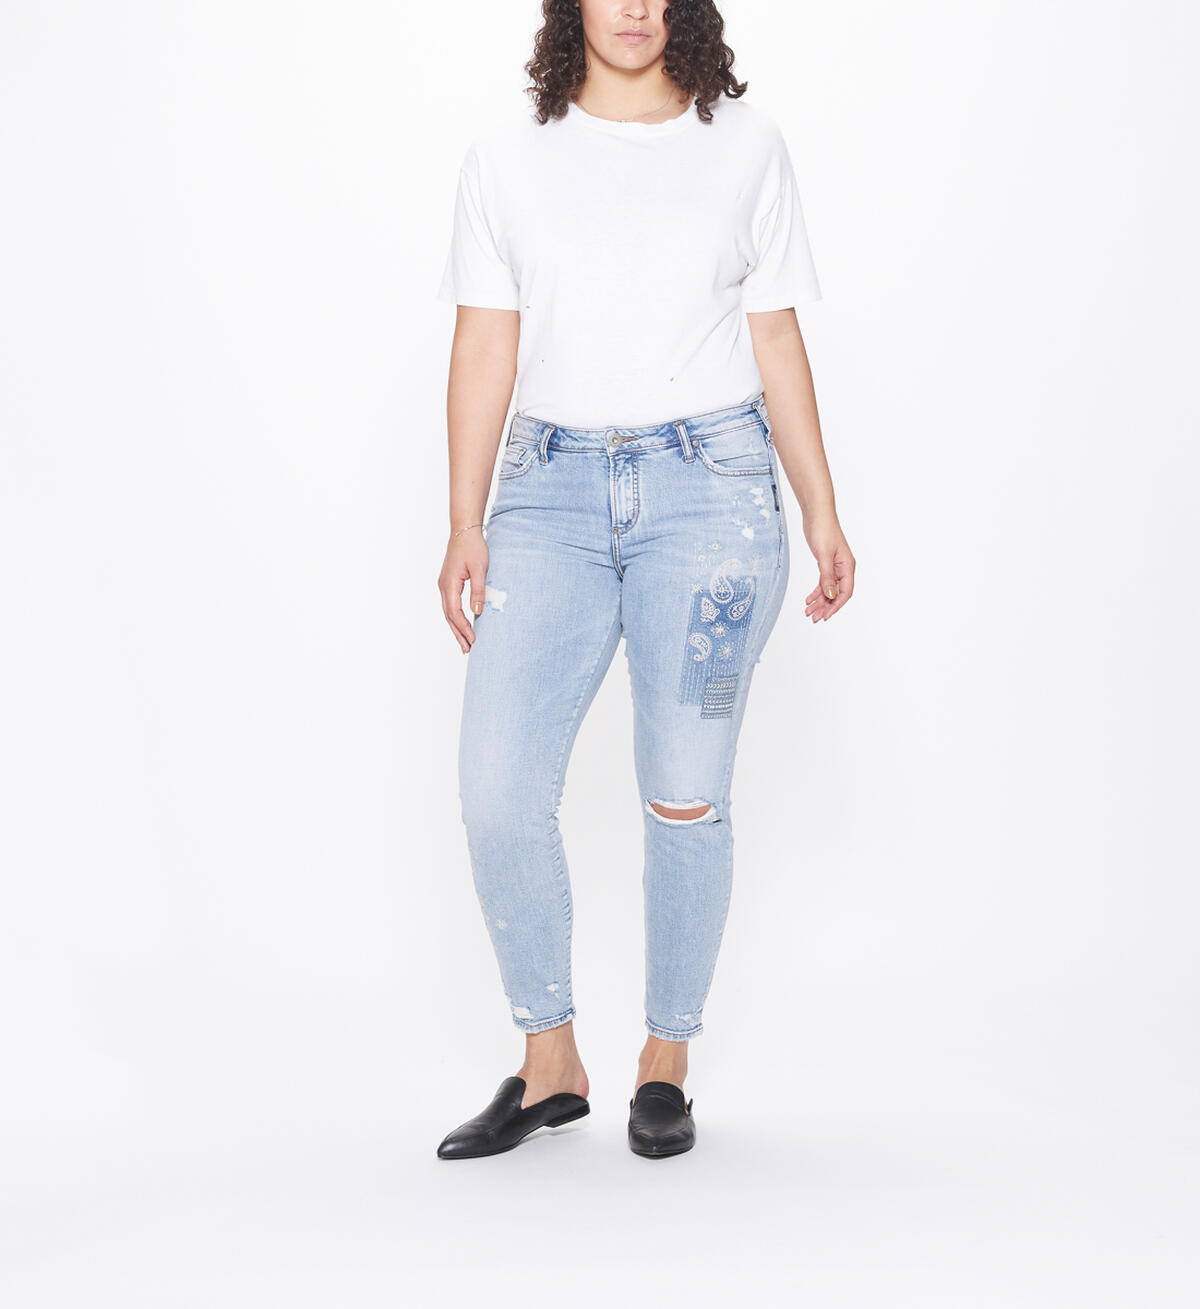 Aiko Mid Rise Ankle Skinny Jeans Plus Size Final Sale, , hi-res image number 0